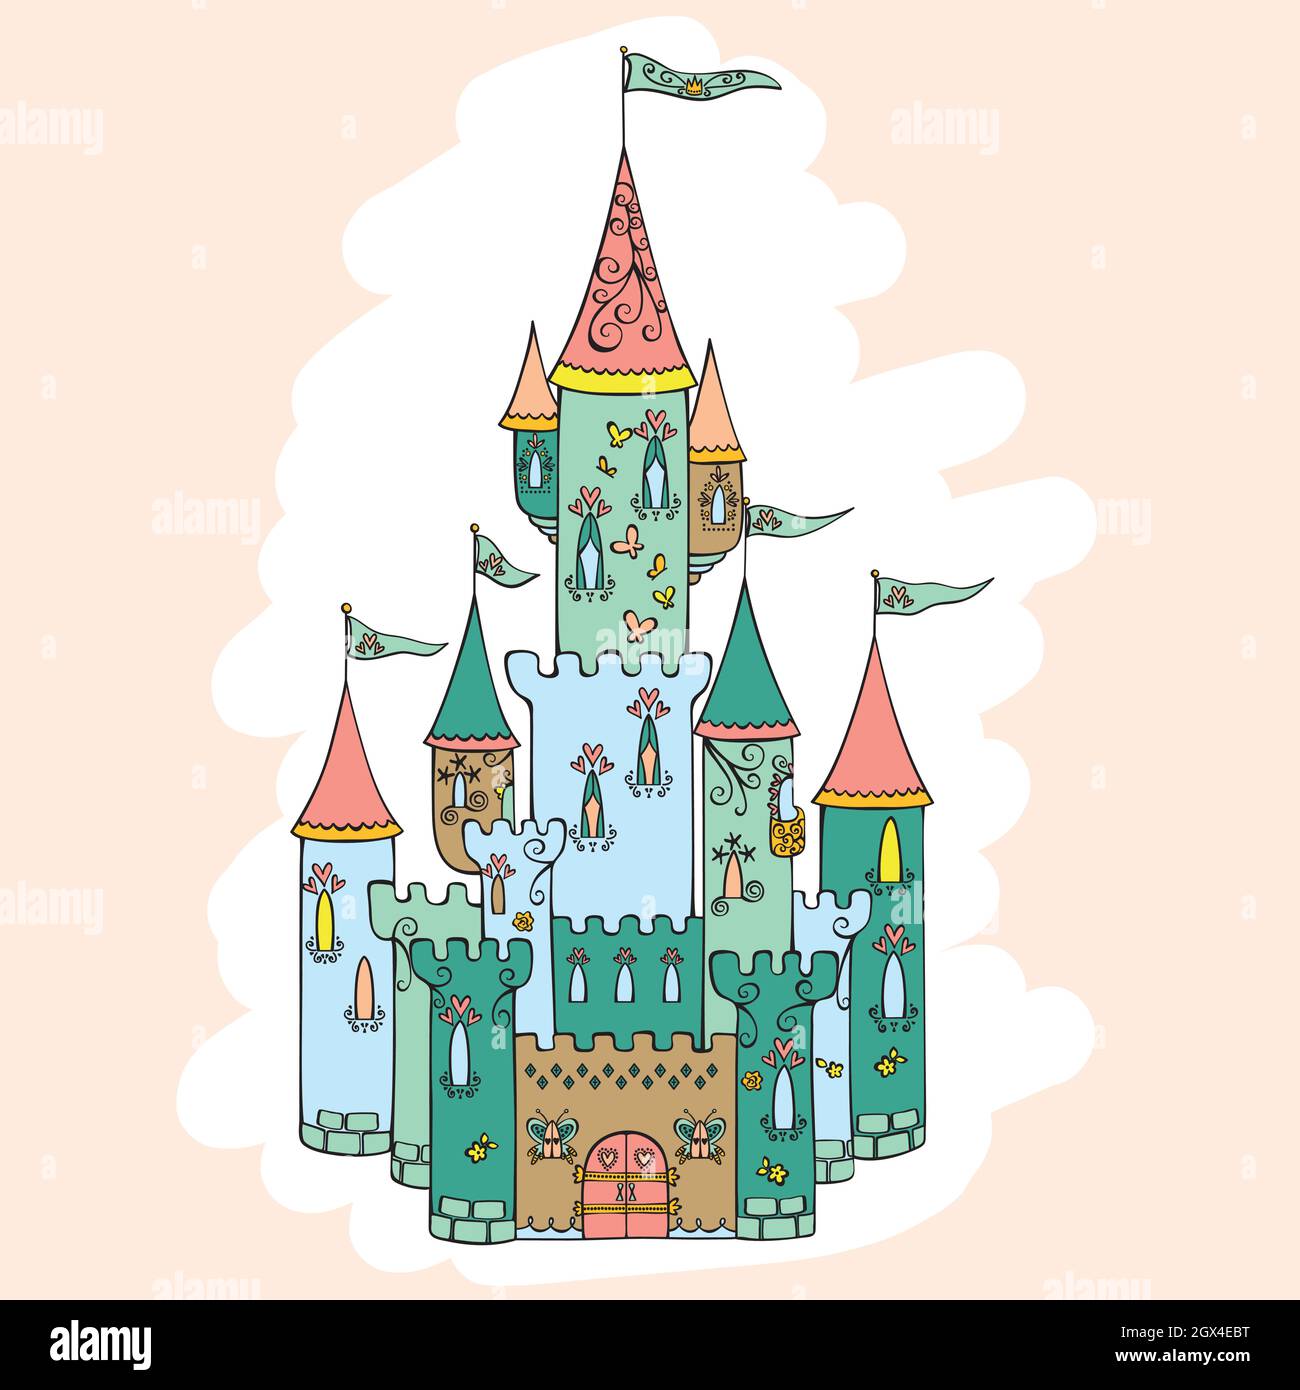 Hand Drawn Castle. Princess Royal Palace. Fairy tale illustration. Hearts, butterflies, flags, tower. Colored doodles. Stock Vector